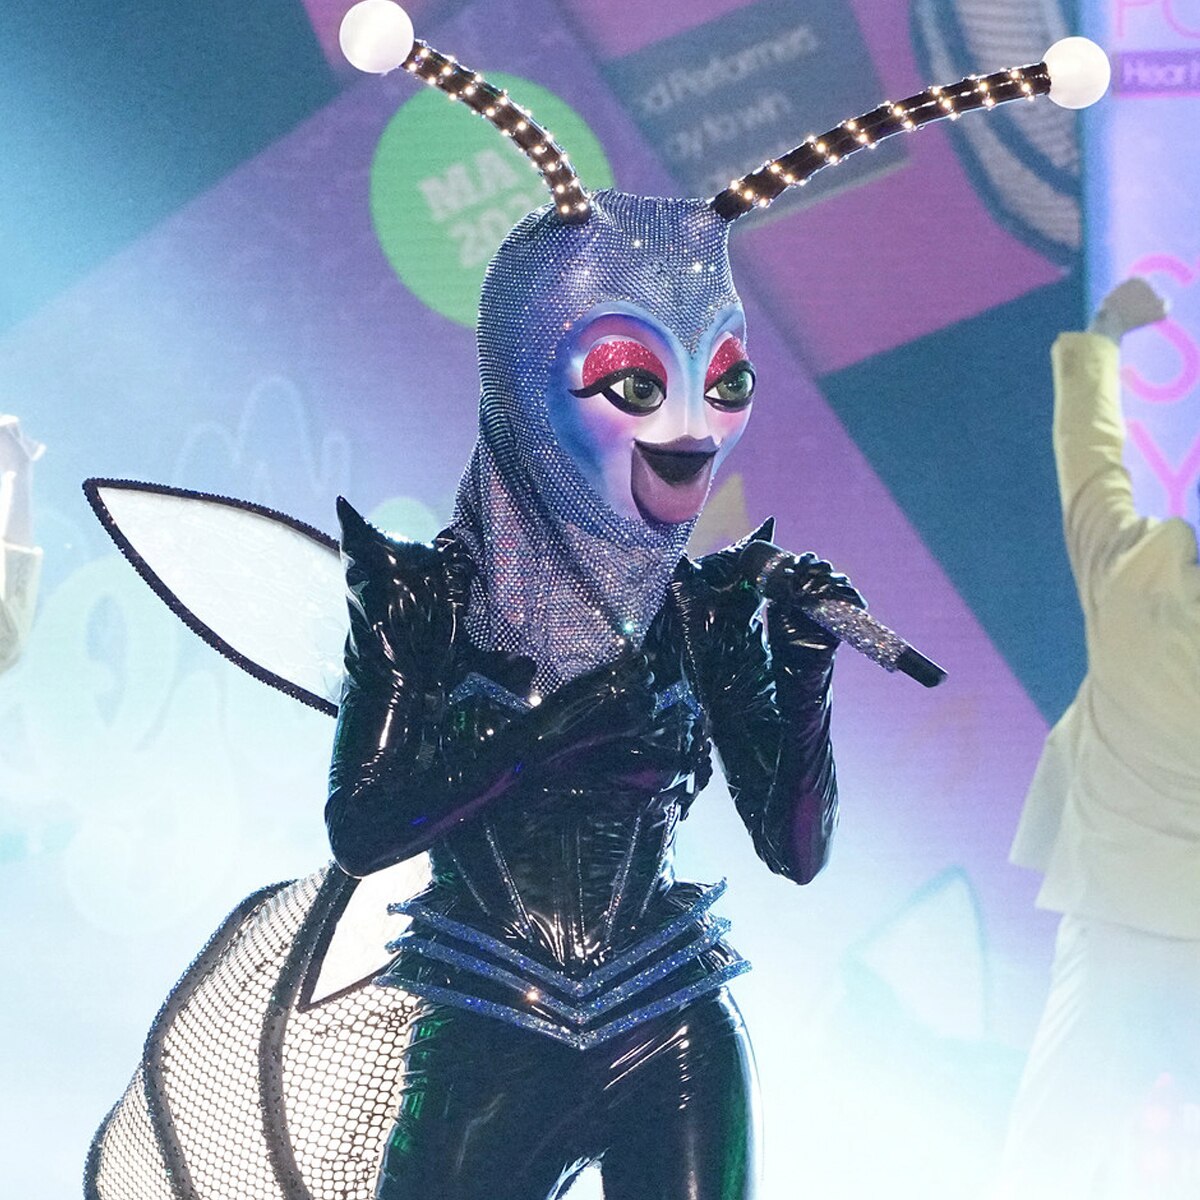 Firefly, The Masked Singer